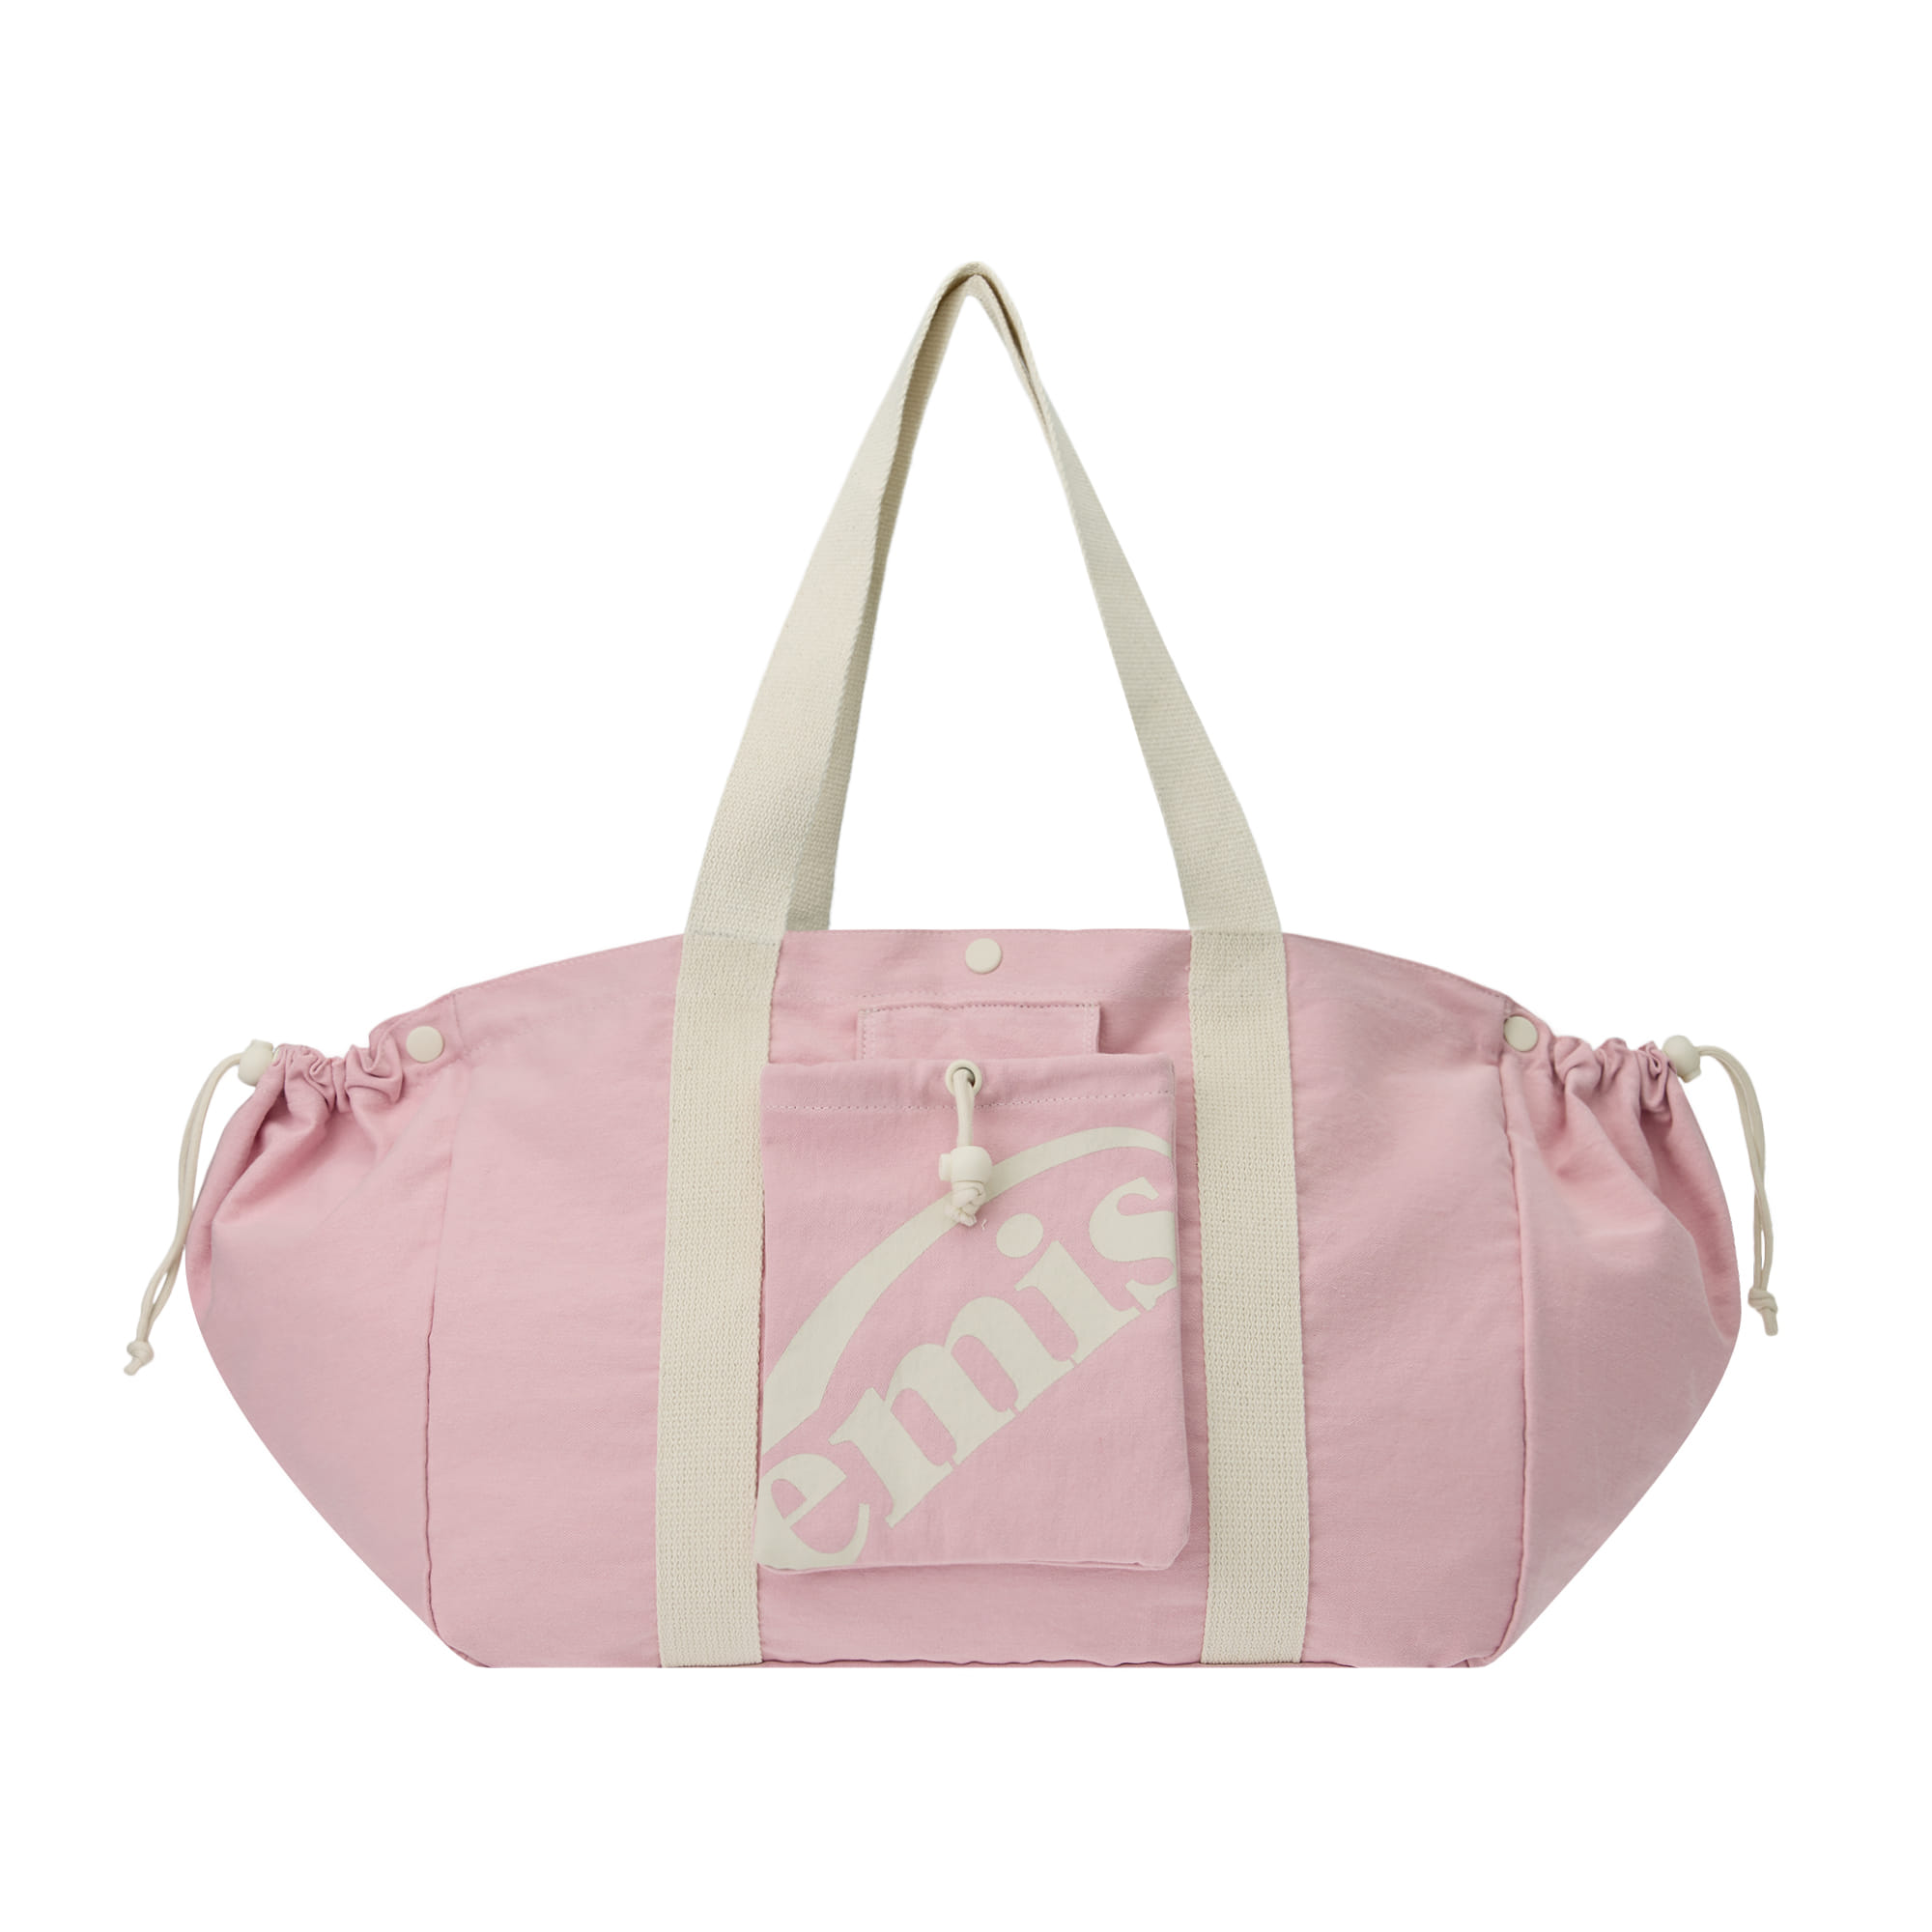 PACKABLE COTTON TOTE BAG-PINK